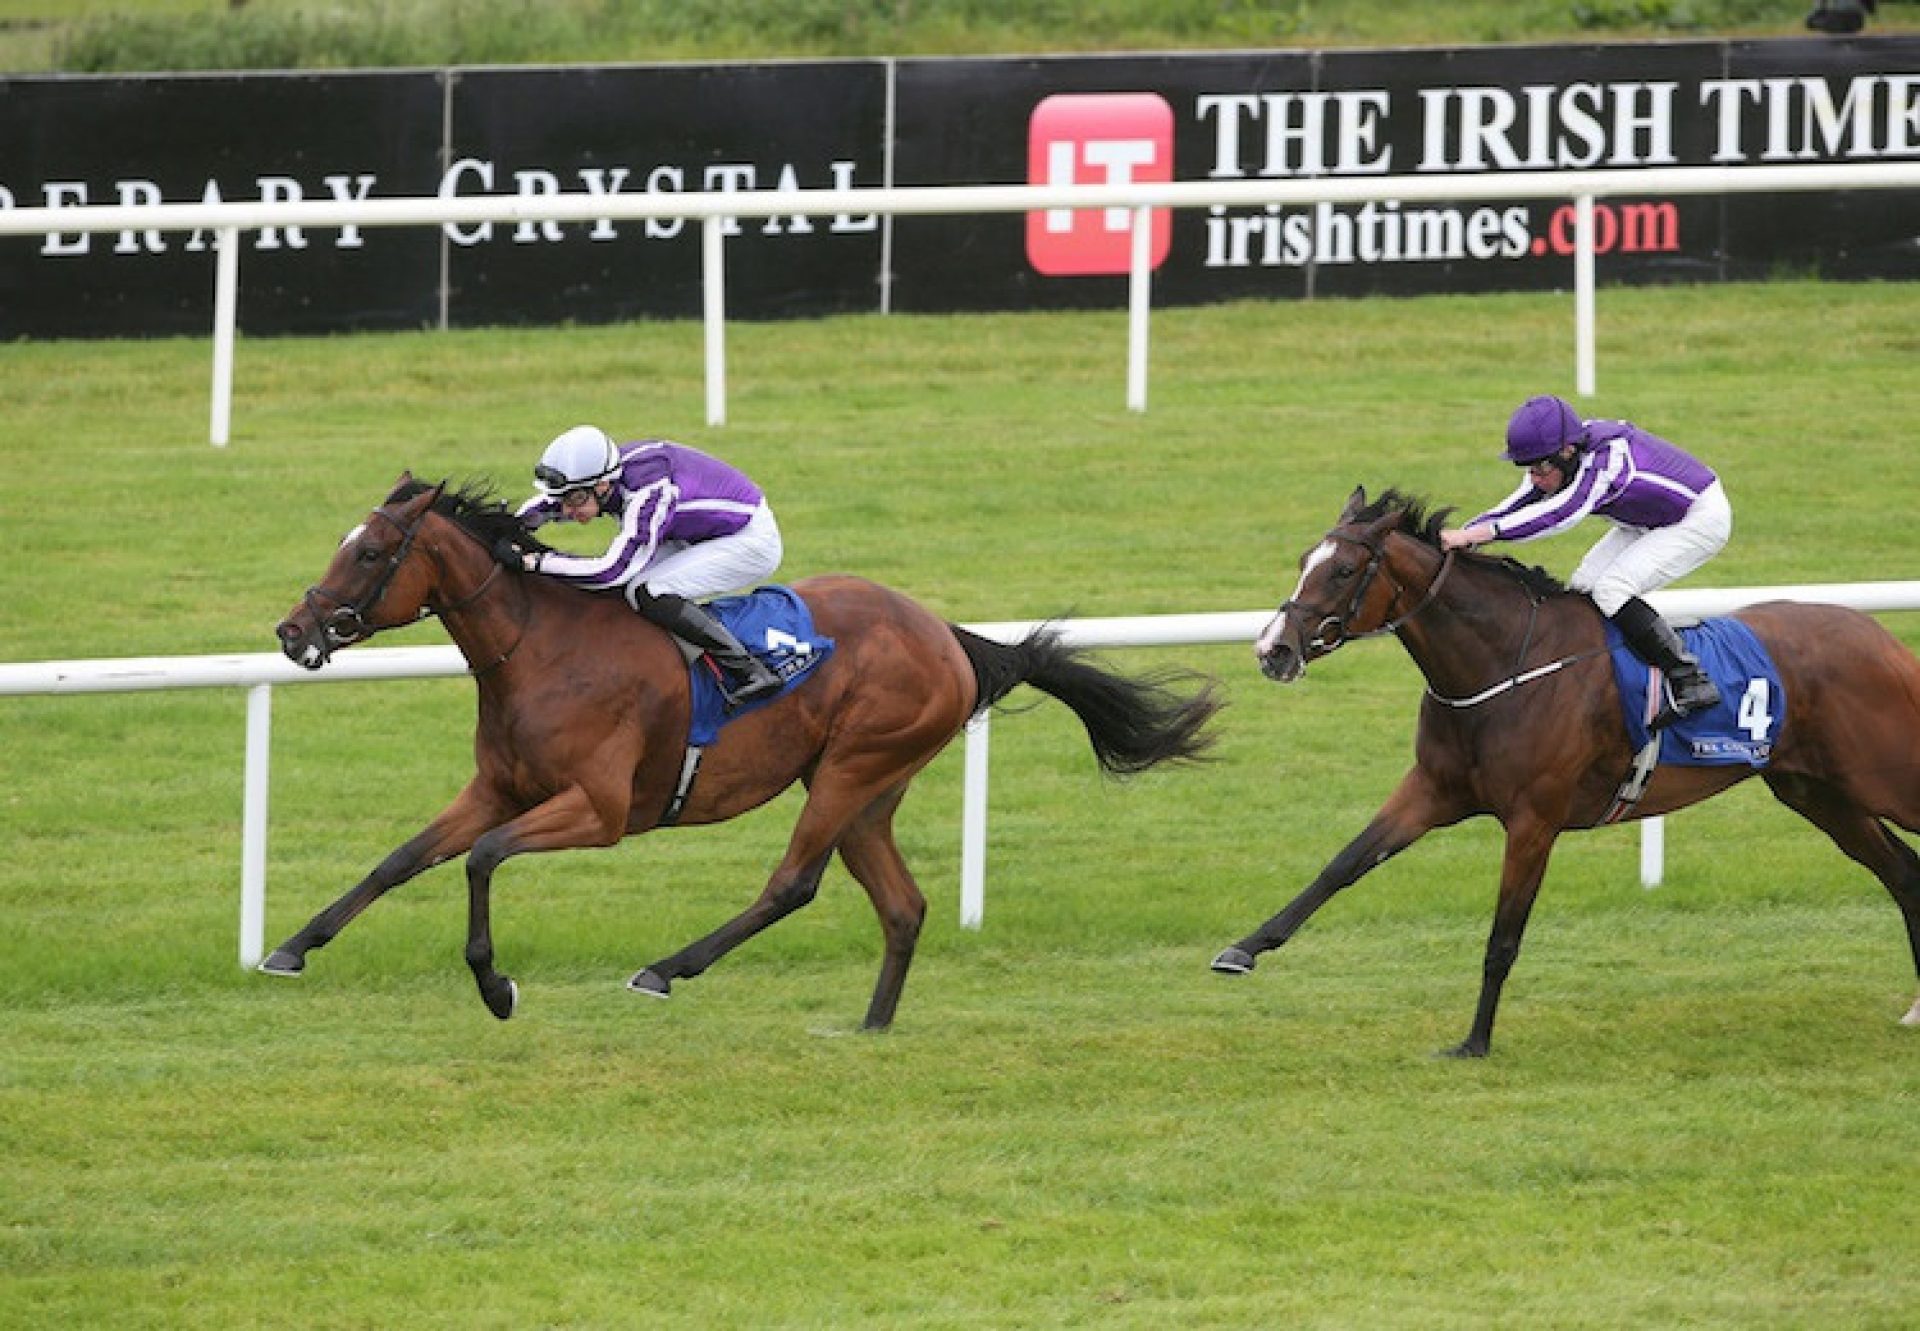 Magical (Galileo) winning the G2 Debutante Stakes at the Curragh